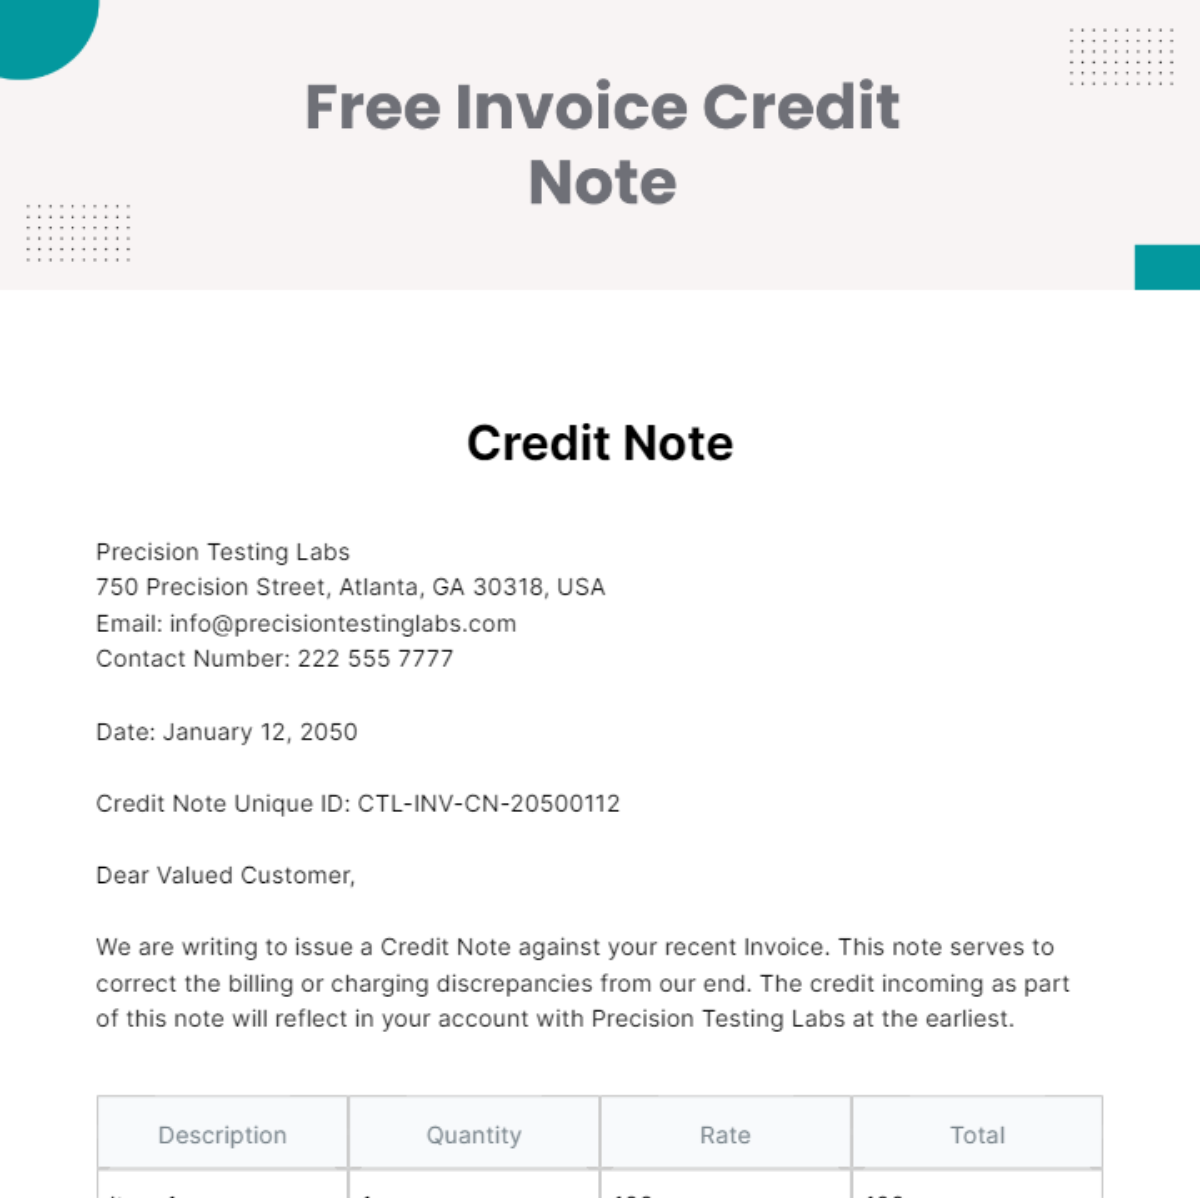 Free Invoice Credit Note Template